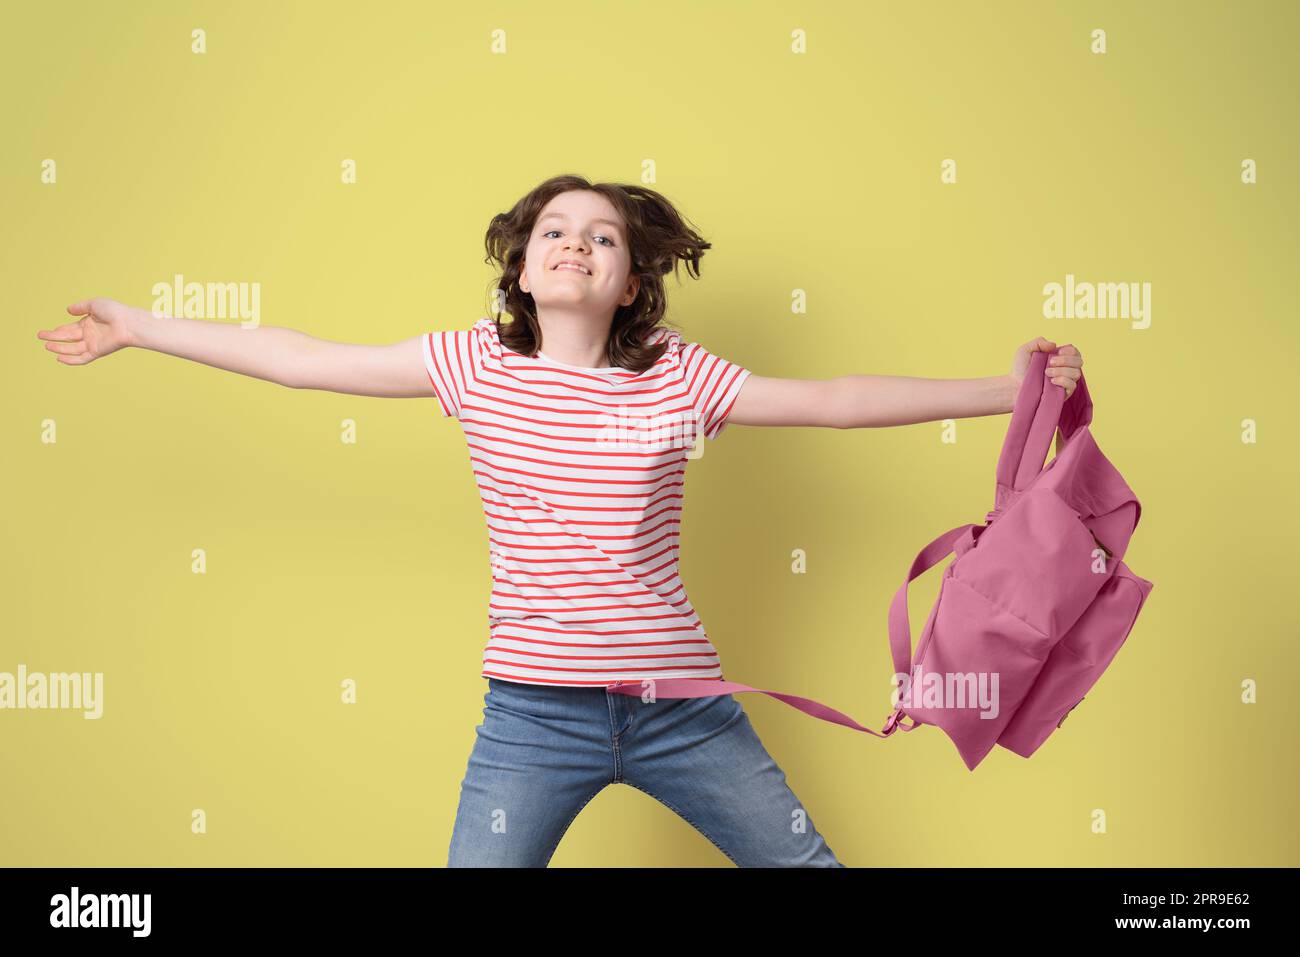 Happy schoolgirl smiling and jumping with pink backpack, looking at camera, on yellow background Stock Photo